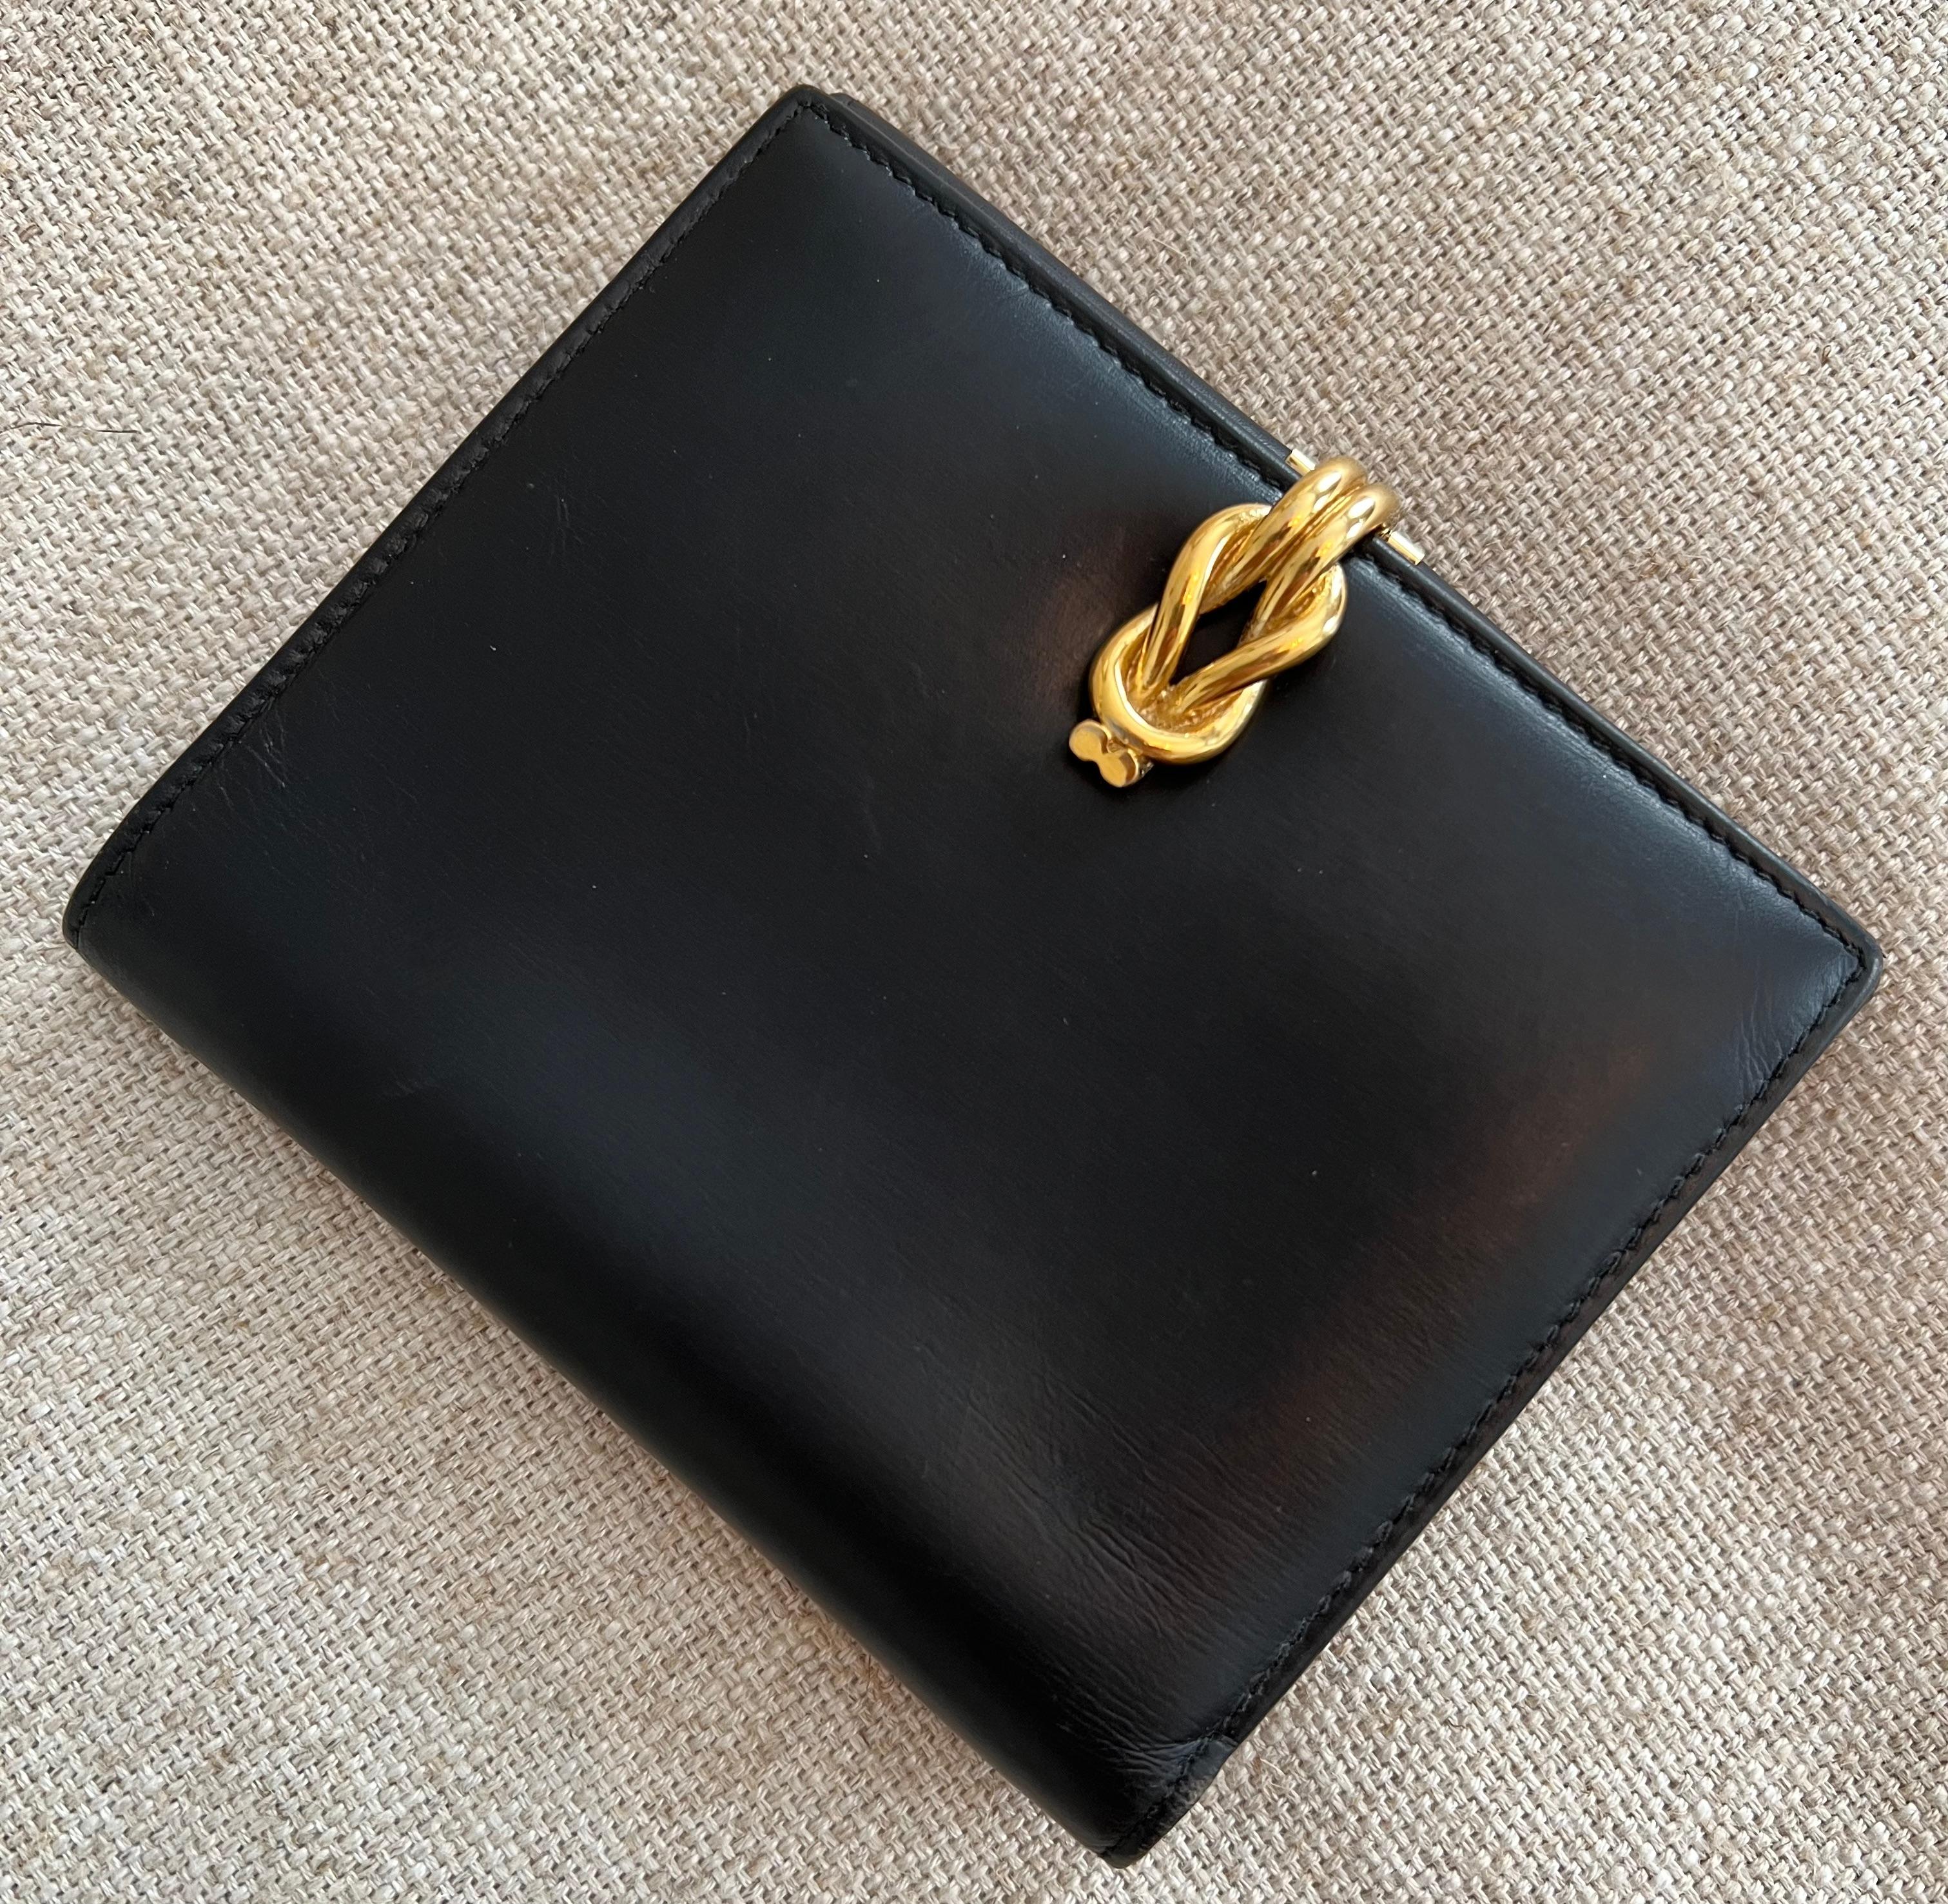 20th Century Gucci Italian Leather Wallet with Gold Knott Closure and Coin Holder